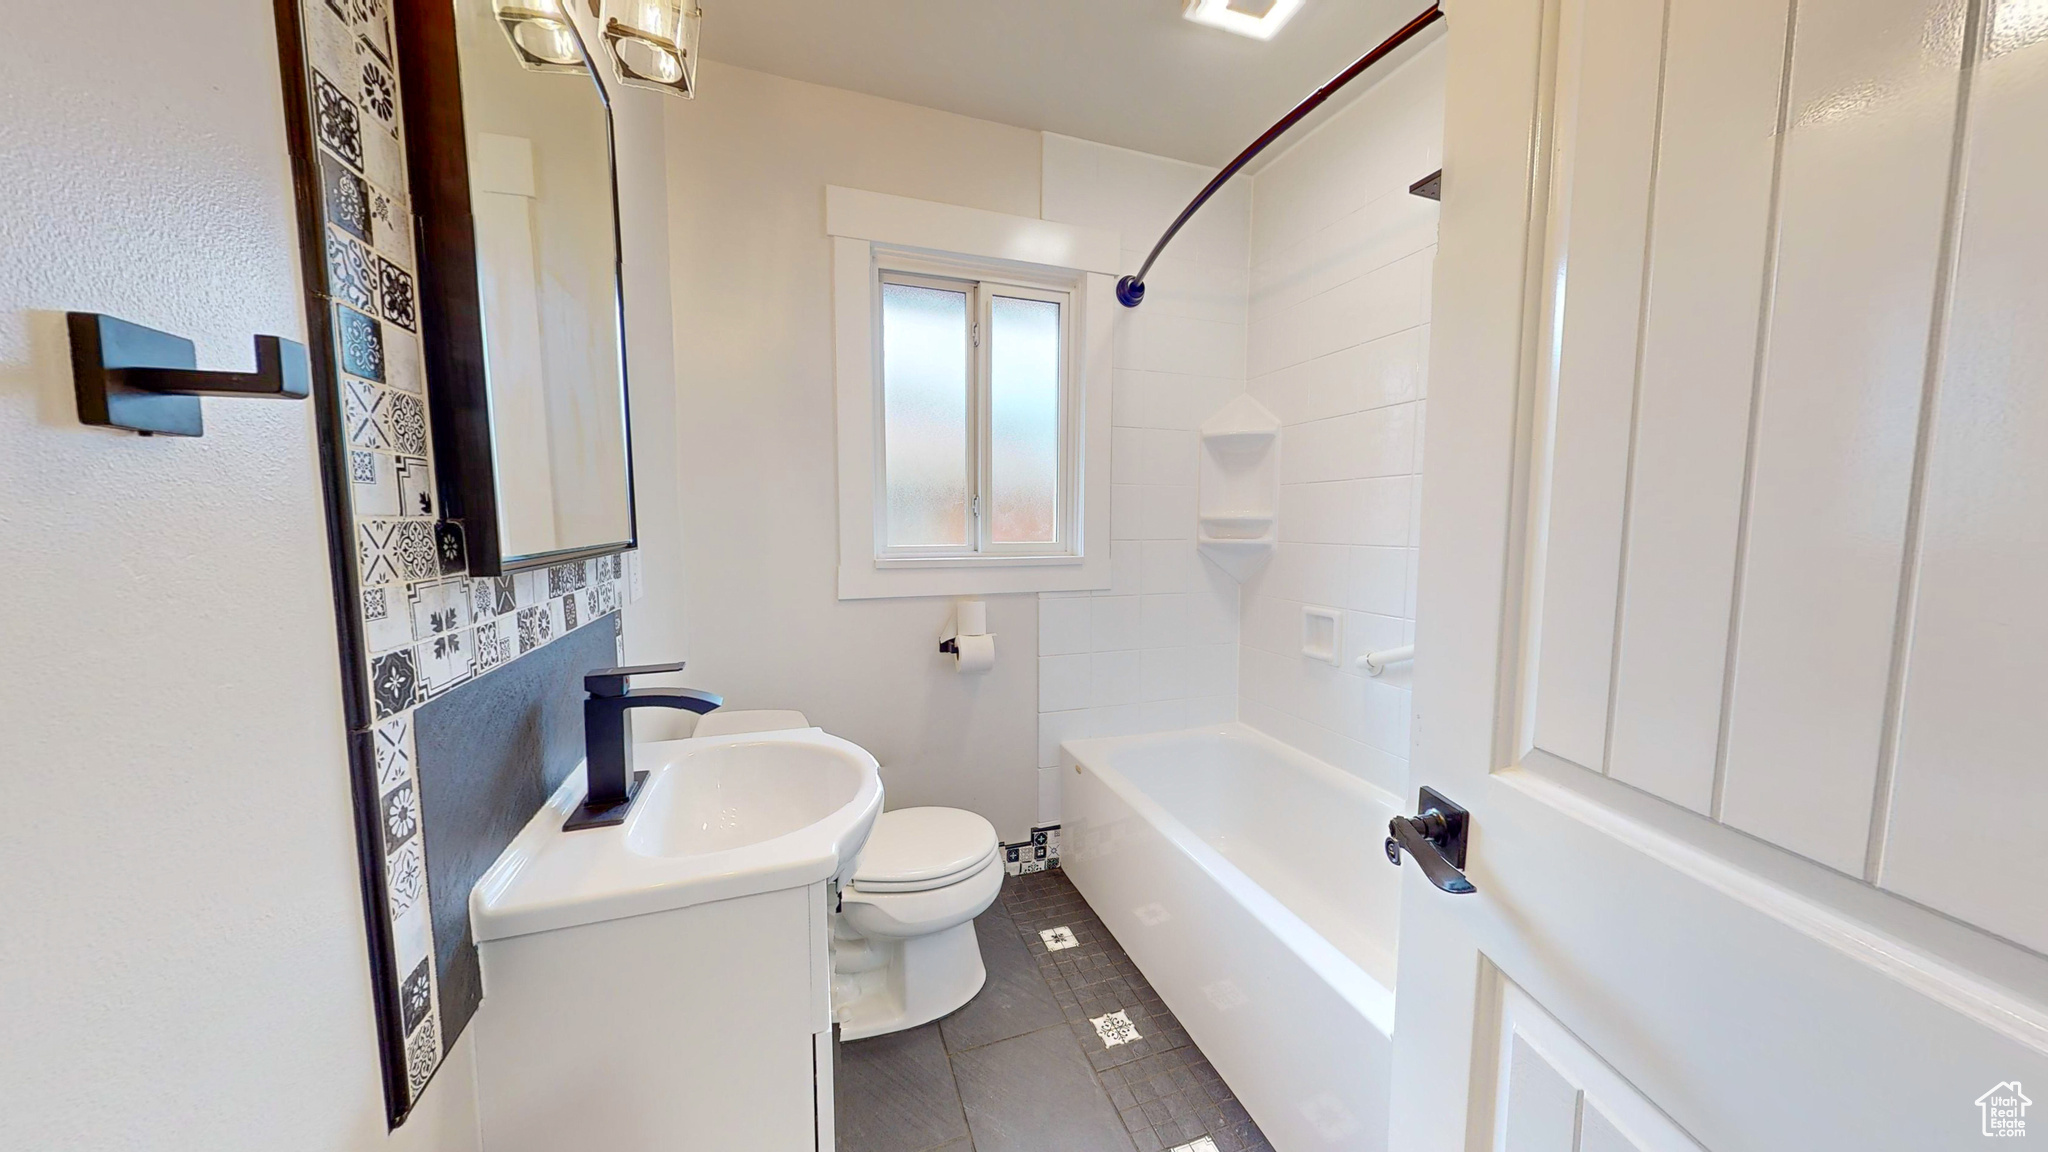 Full bathroom with tile flooring,  shower combination, toilet, and large vanity